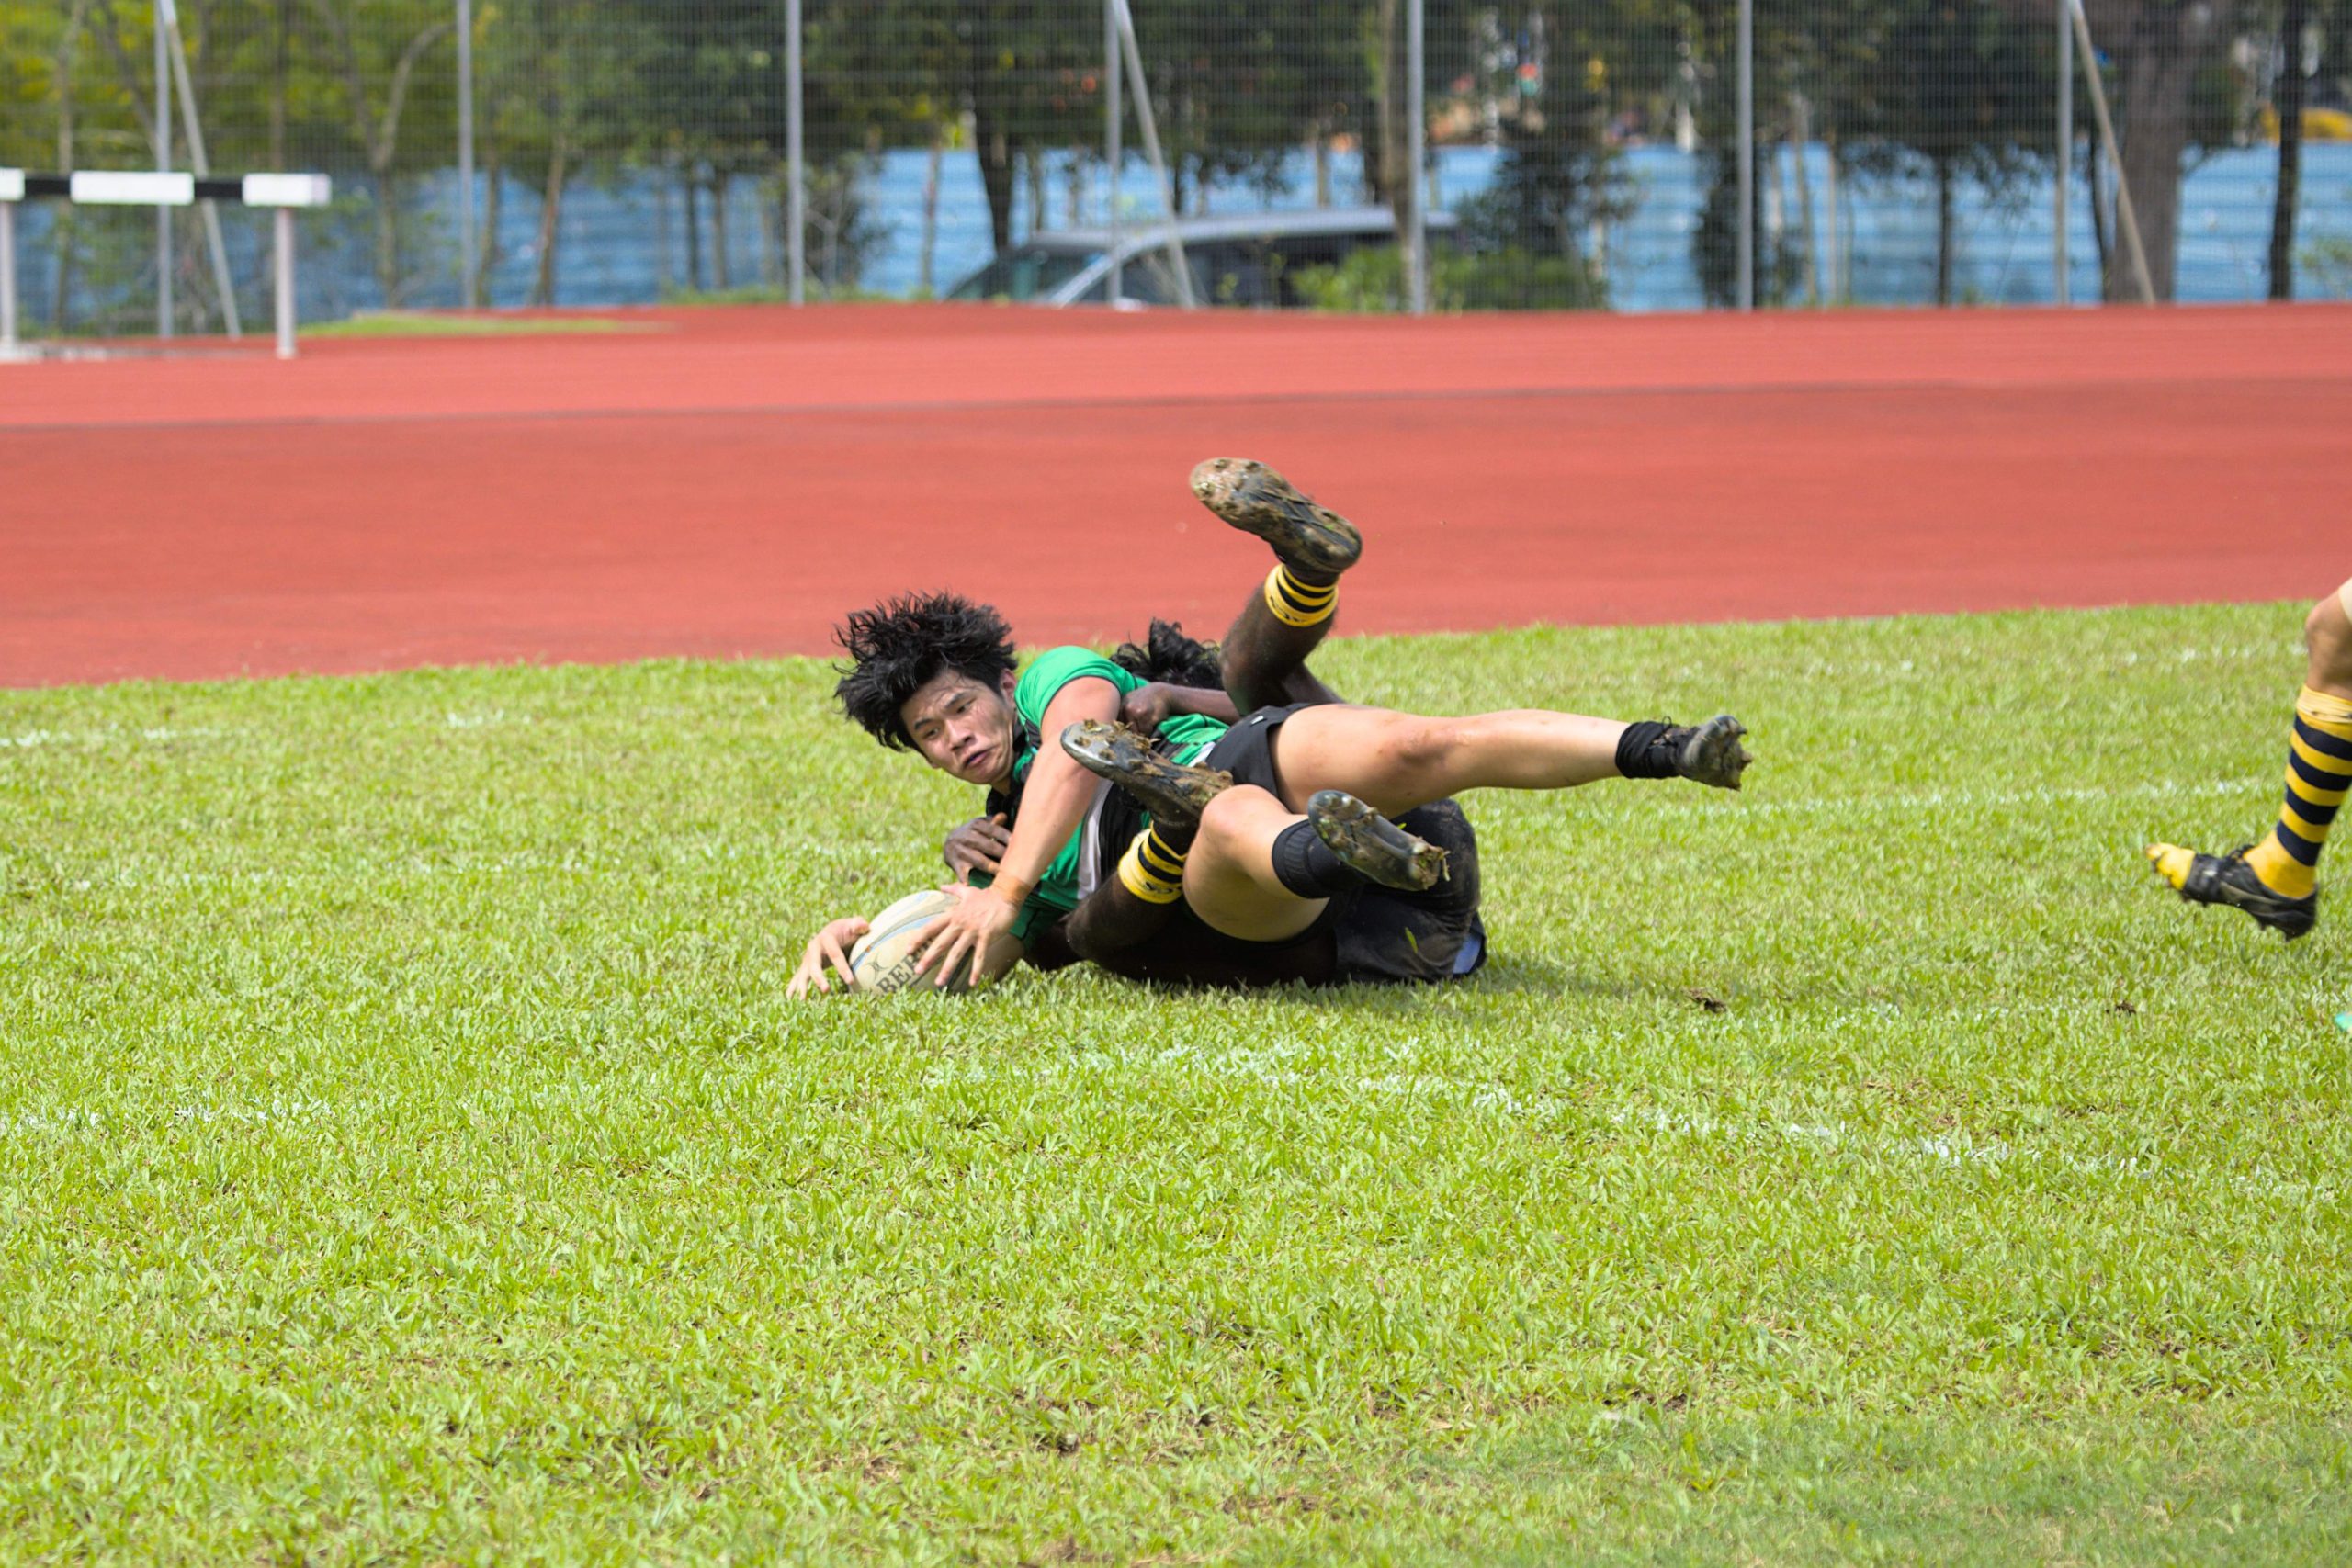 RI's Tyler Leong fought through a covering tackle by ACJC's Ramanathan Annamalai to score the second half's only try.